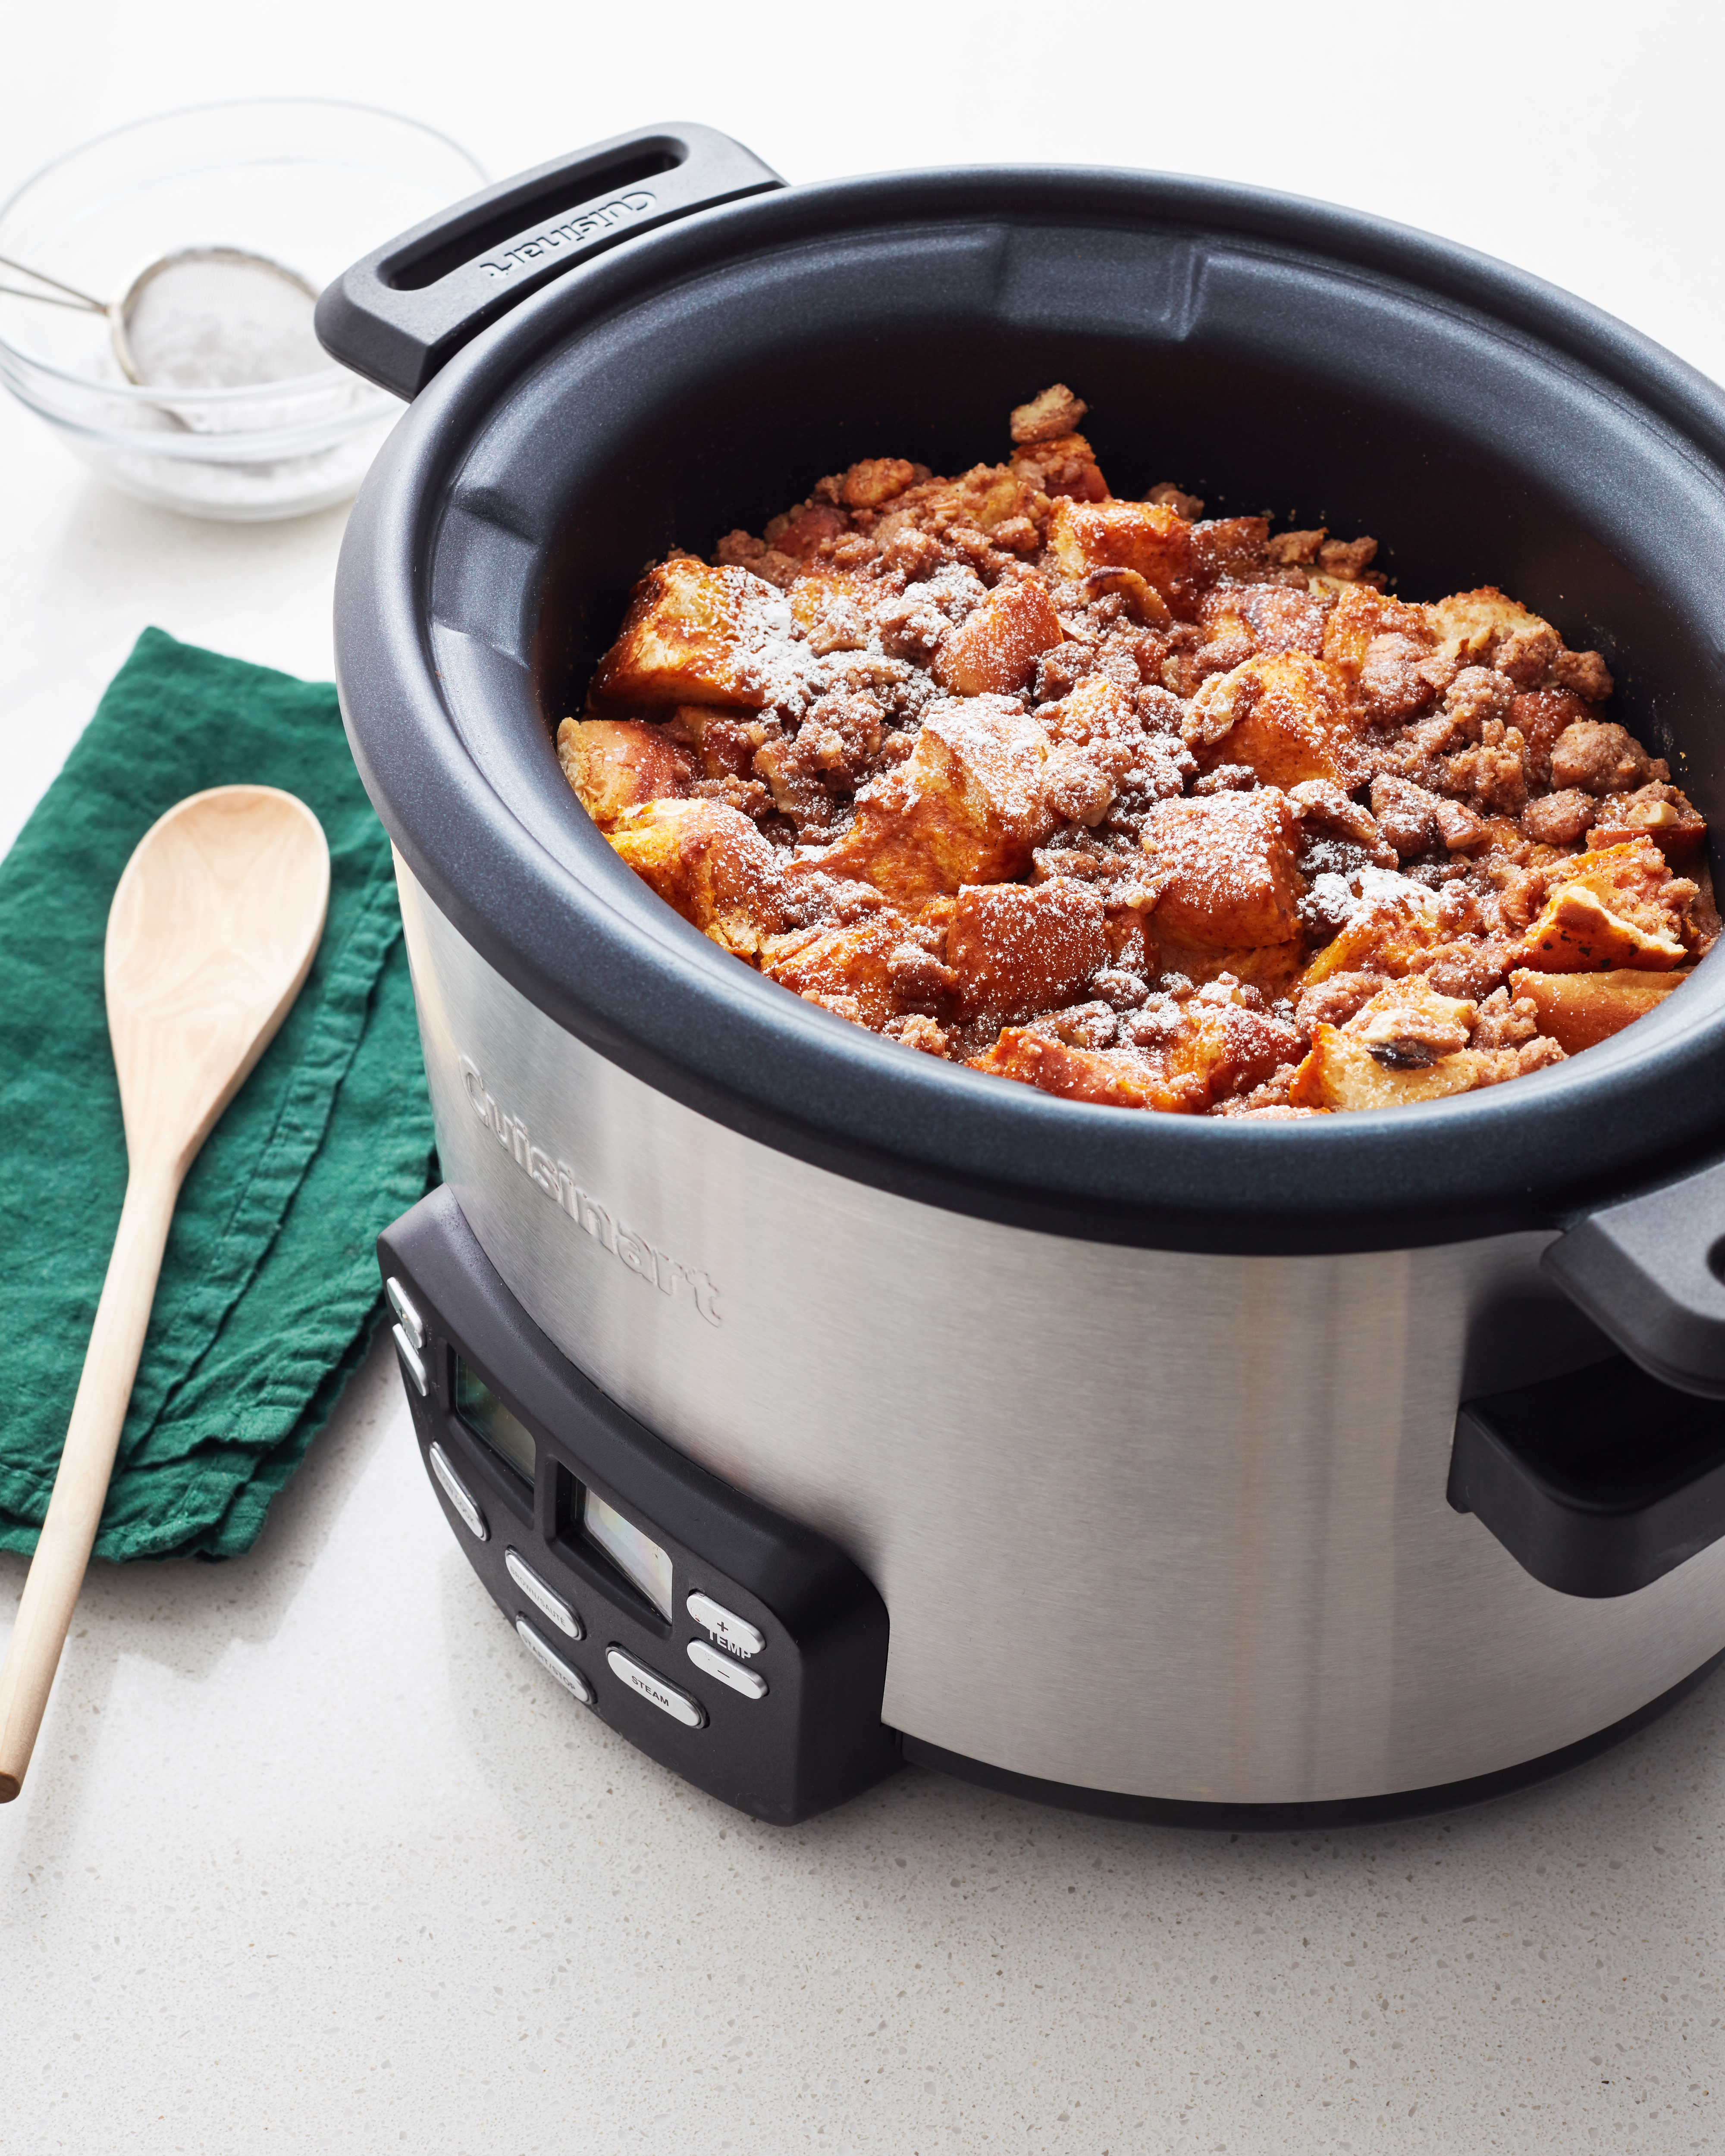 14 Slow Cooker Breakfast Recipes for a Stress-Free Morning